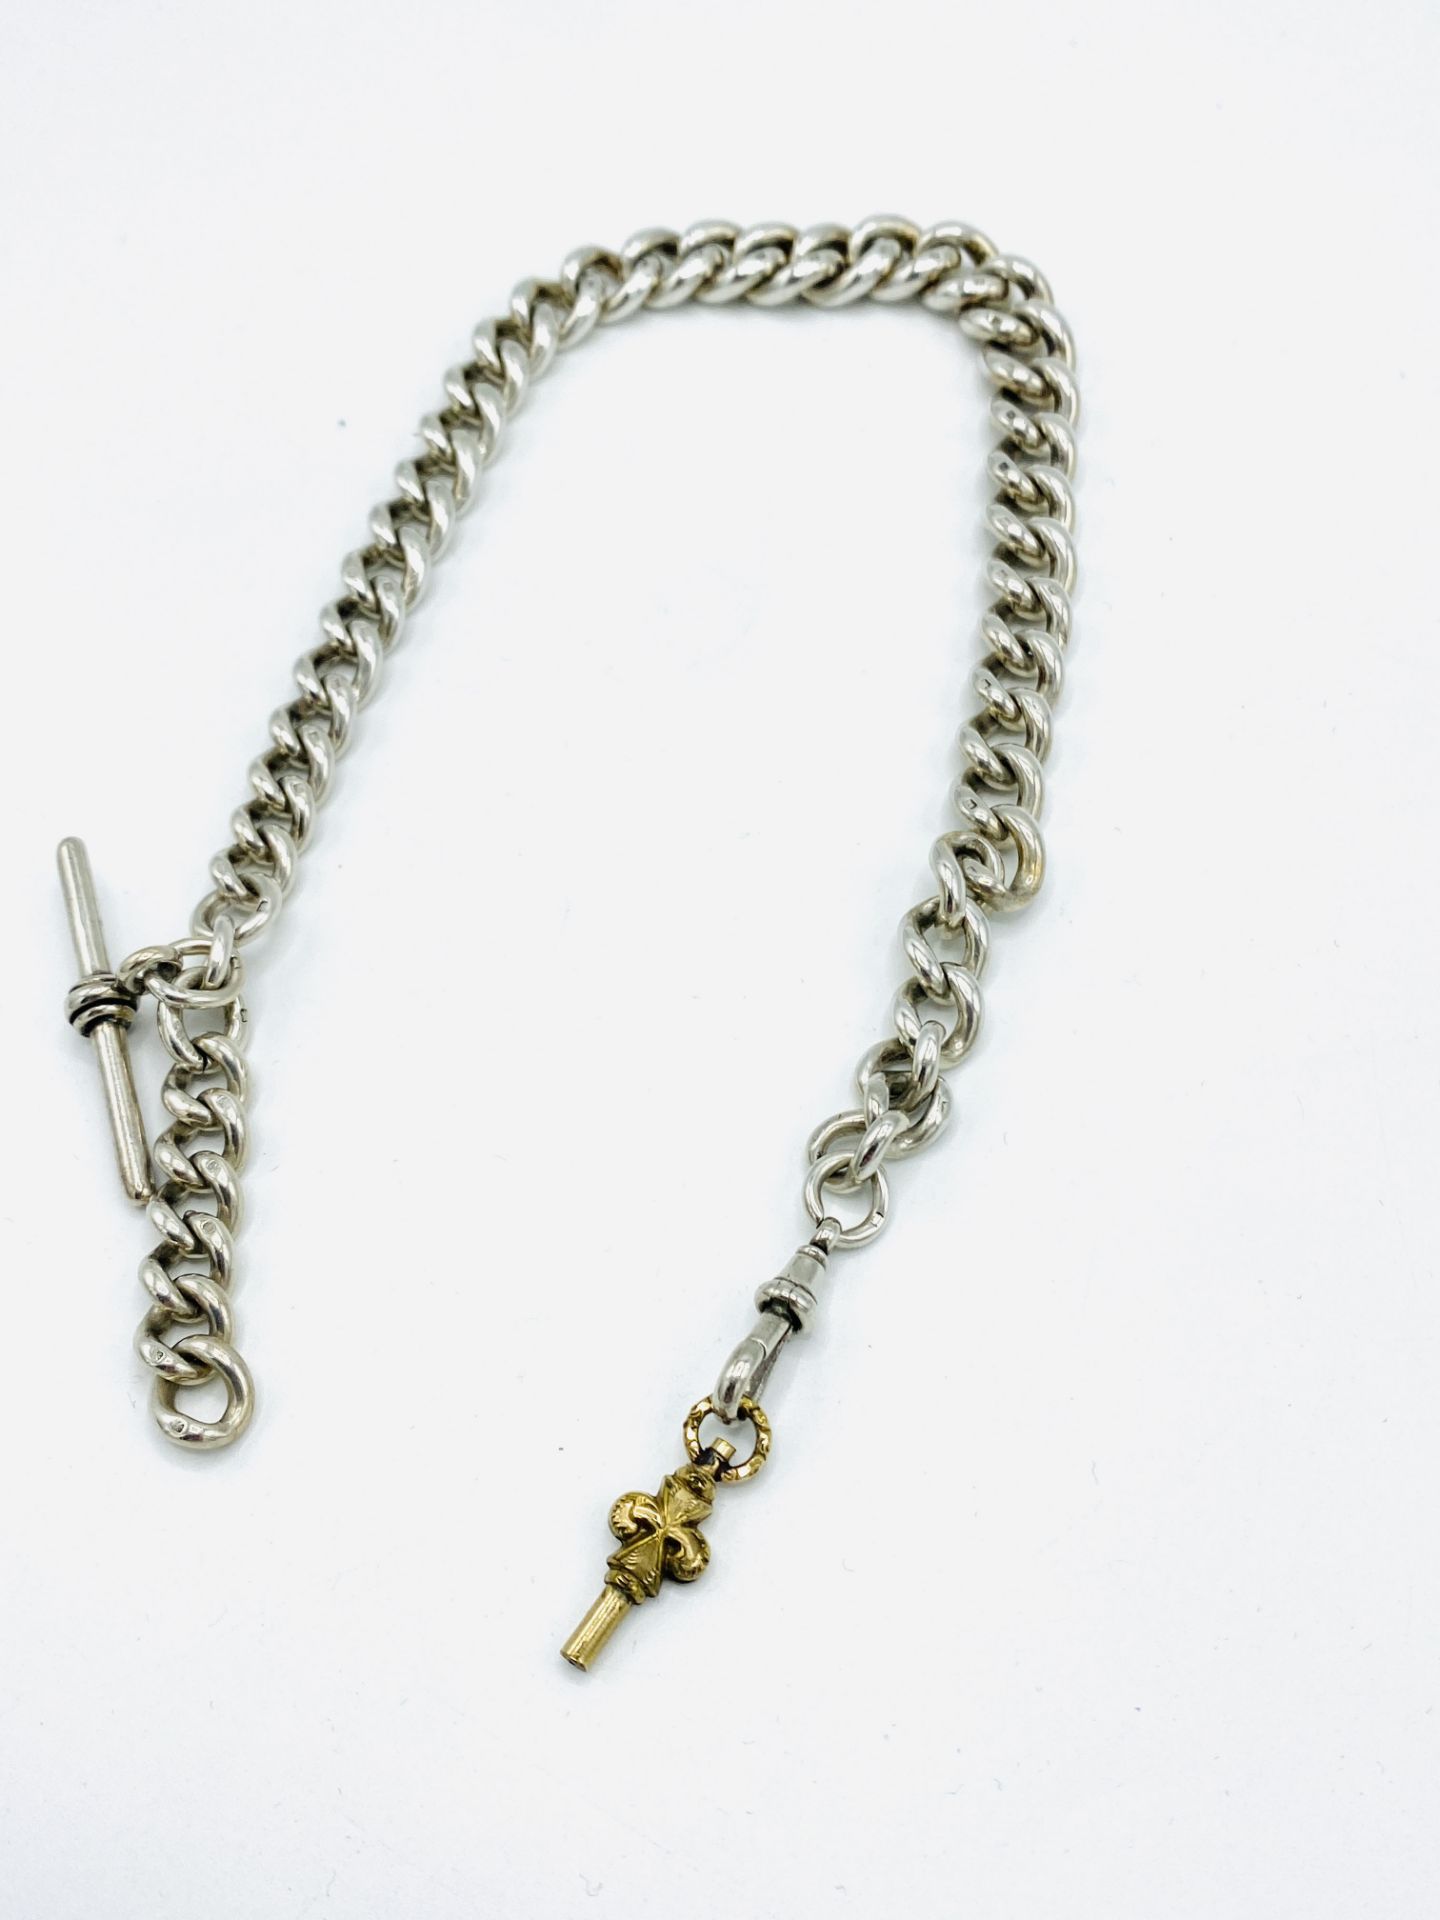 Silver fob chain - Image 5 of 6